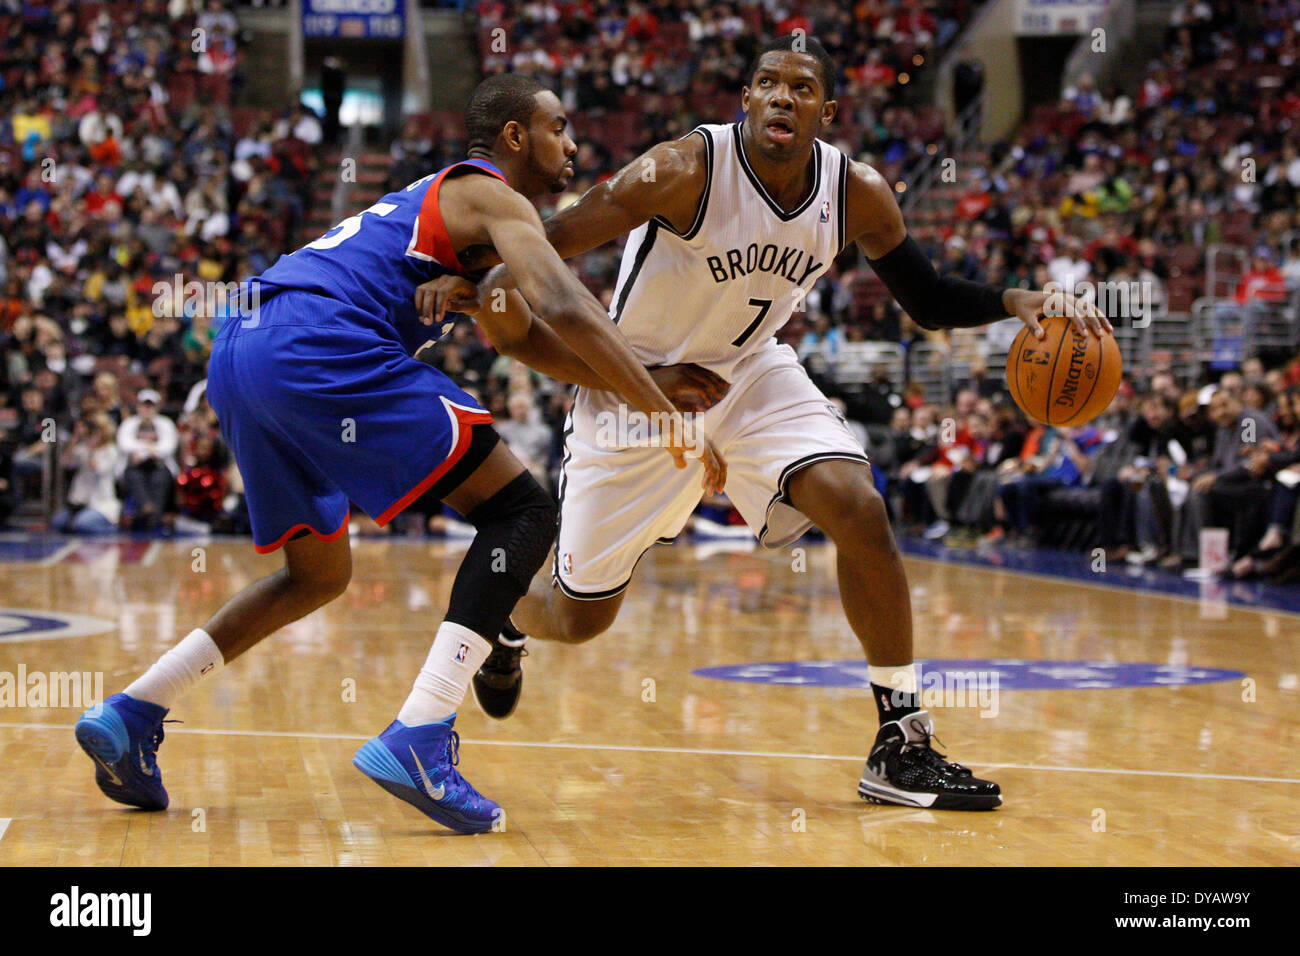 April 5, 2014: Brooklyn Nets guard Joe Johnson (7) in action against Philadelphia 76ers guard Elliot Williams (25) during the NBA game between the Brooklyn Nets and the Philadelphia 76ers at the Wells Fargo Center in Philadelphia, Pennsylvania. The Nets won 105-101. Christopher Szagola/Cal Sport Media Stock Photo